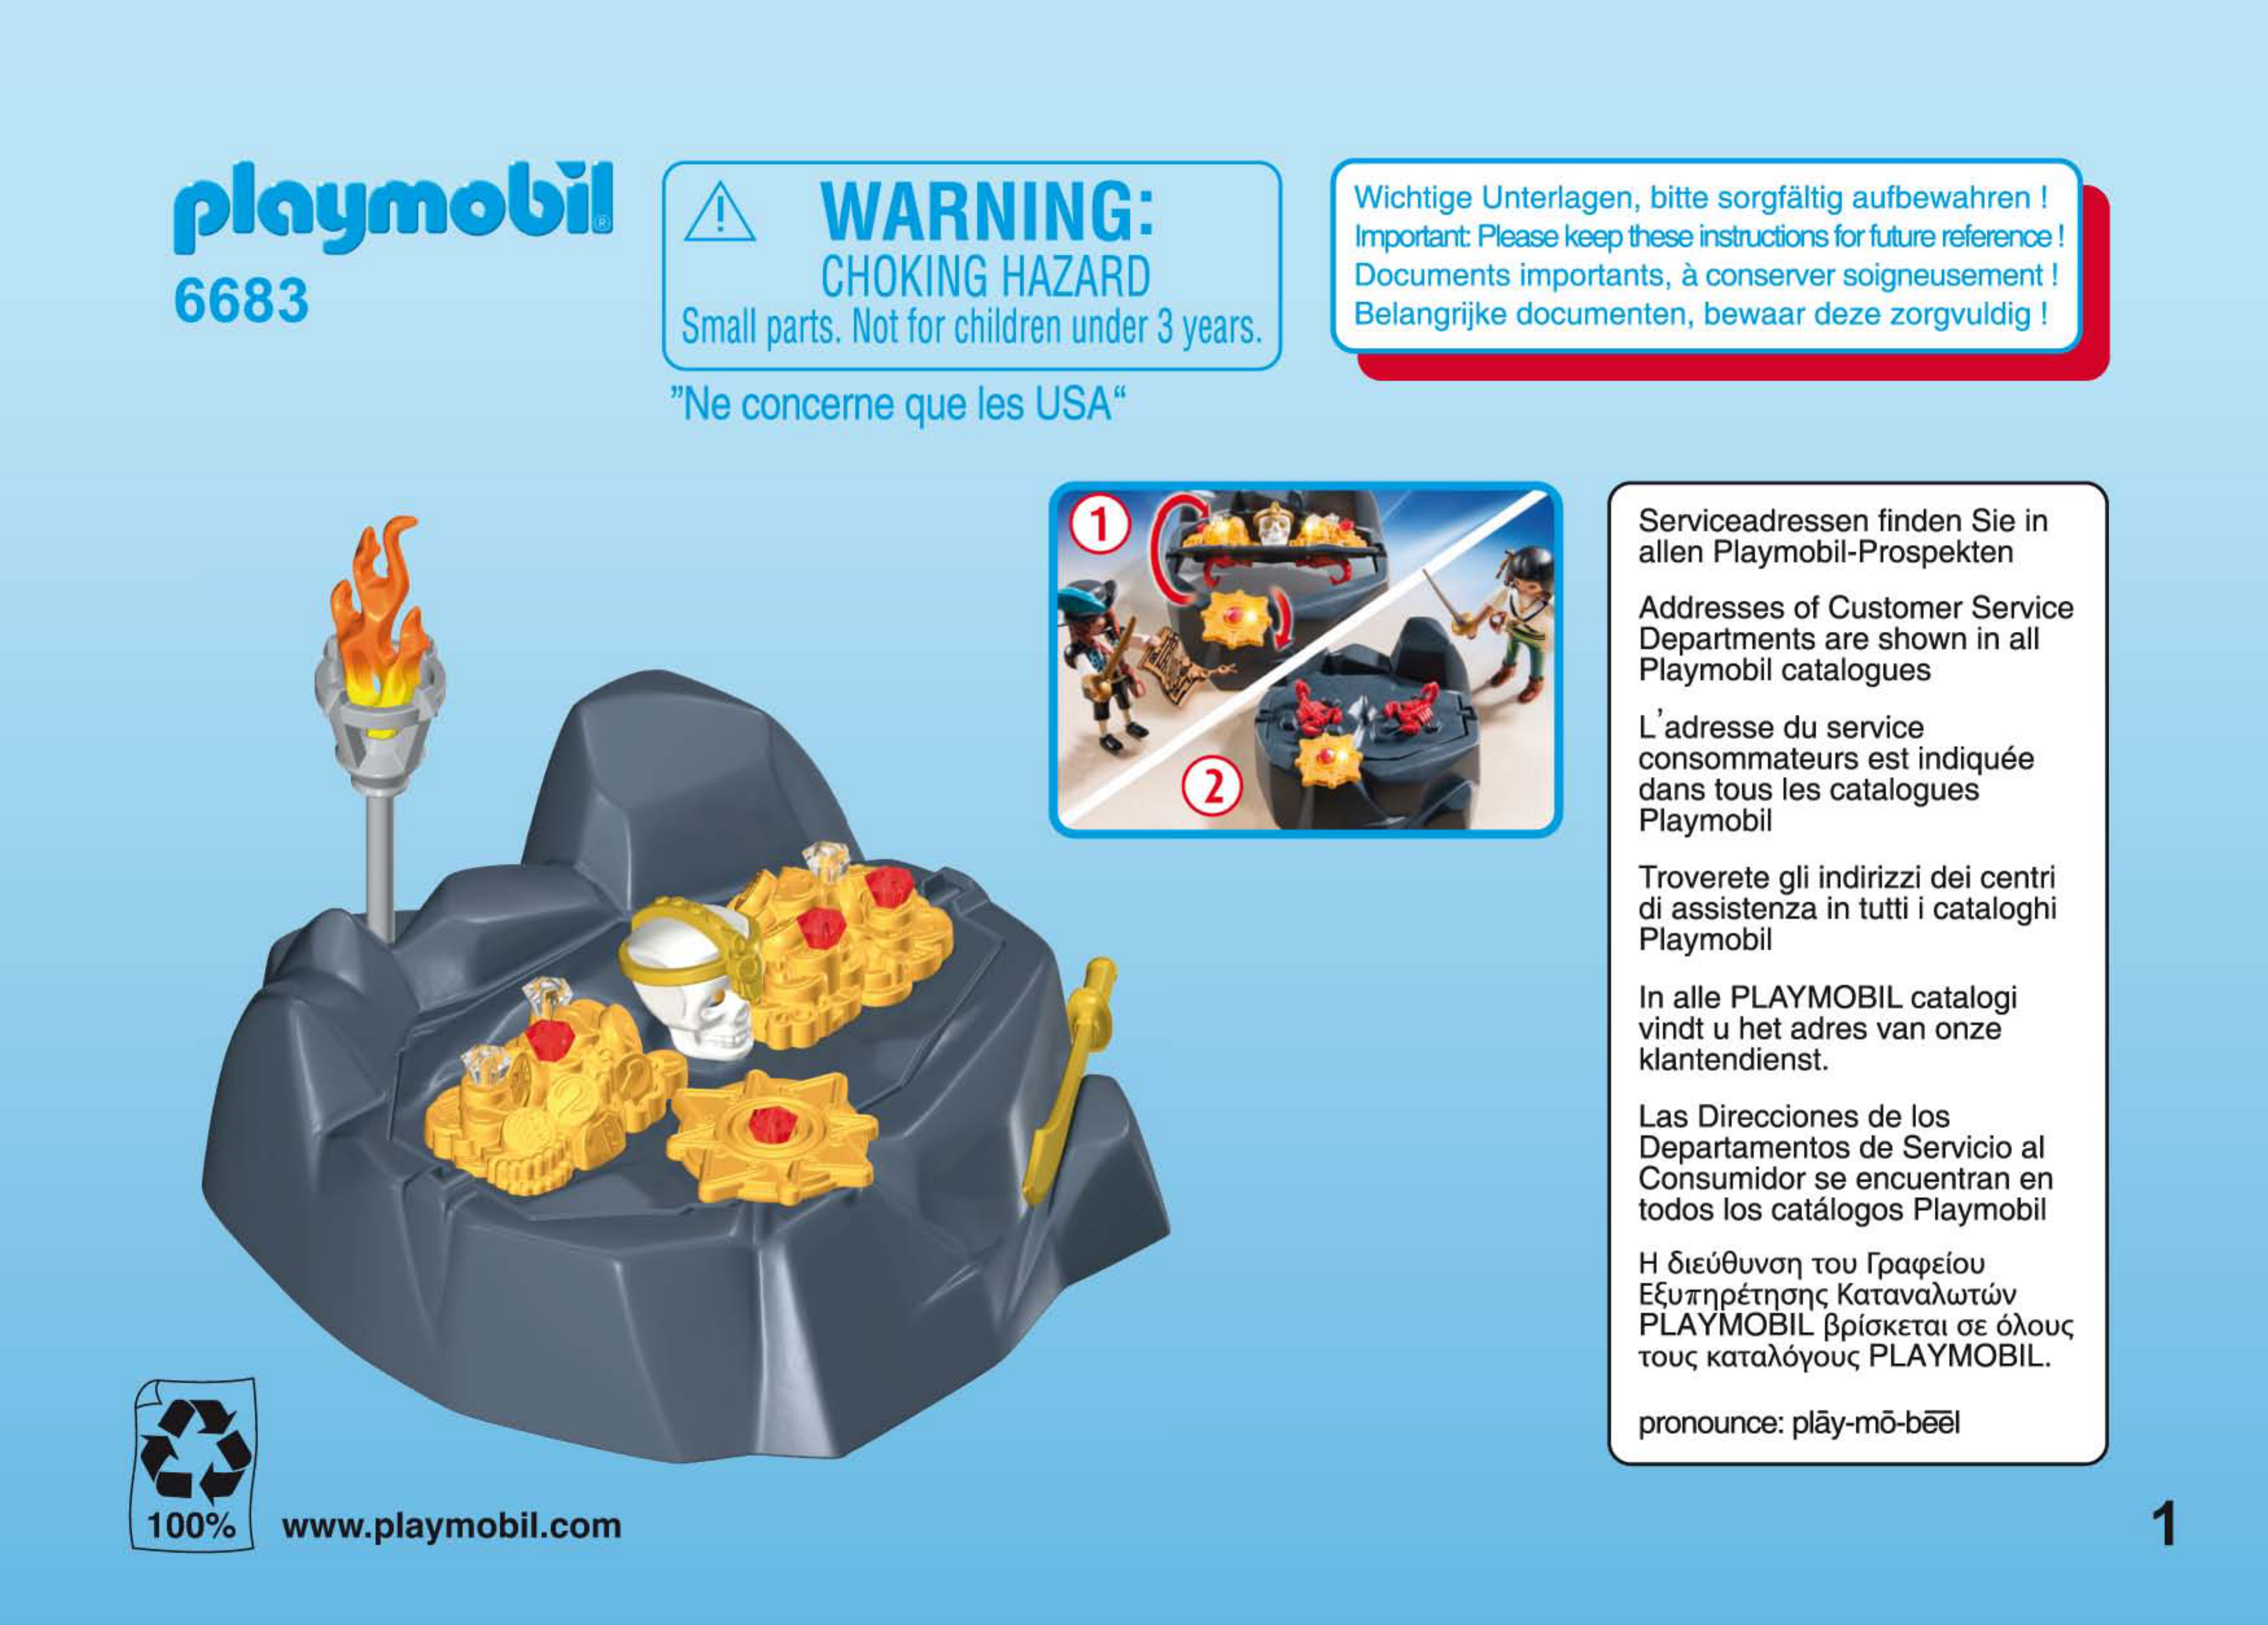 virtual Repeated pint Manual Playmobil 6683 (page 1 of 4) (All languages)